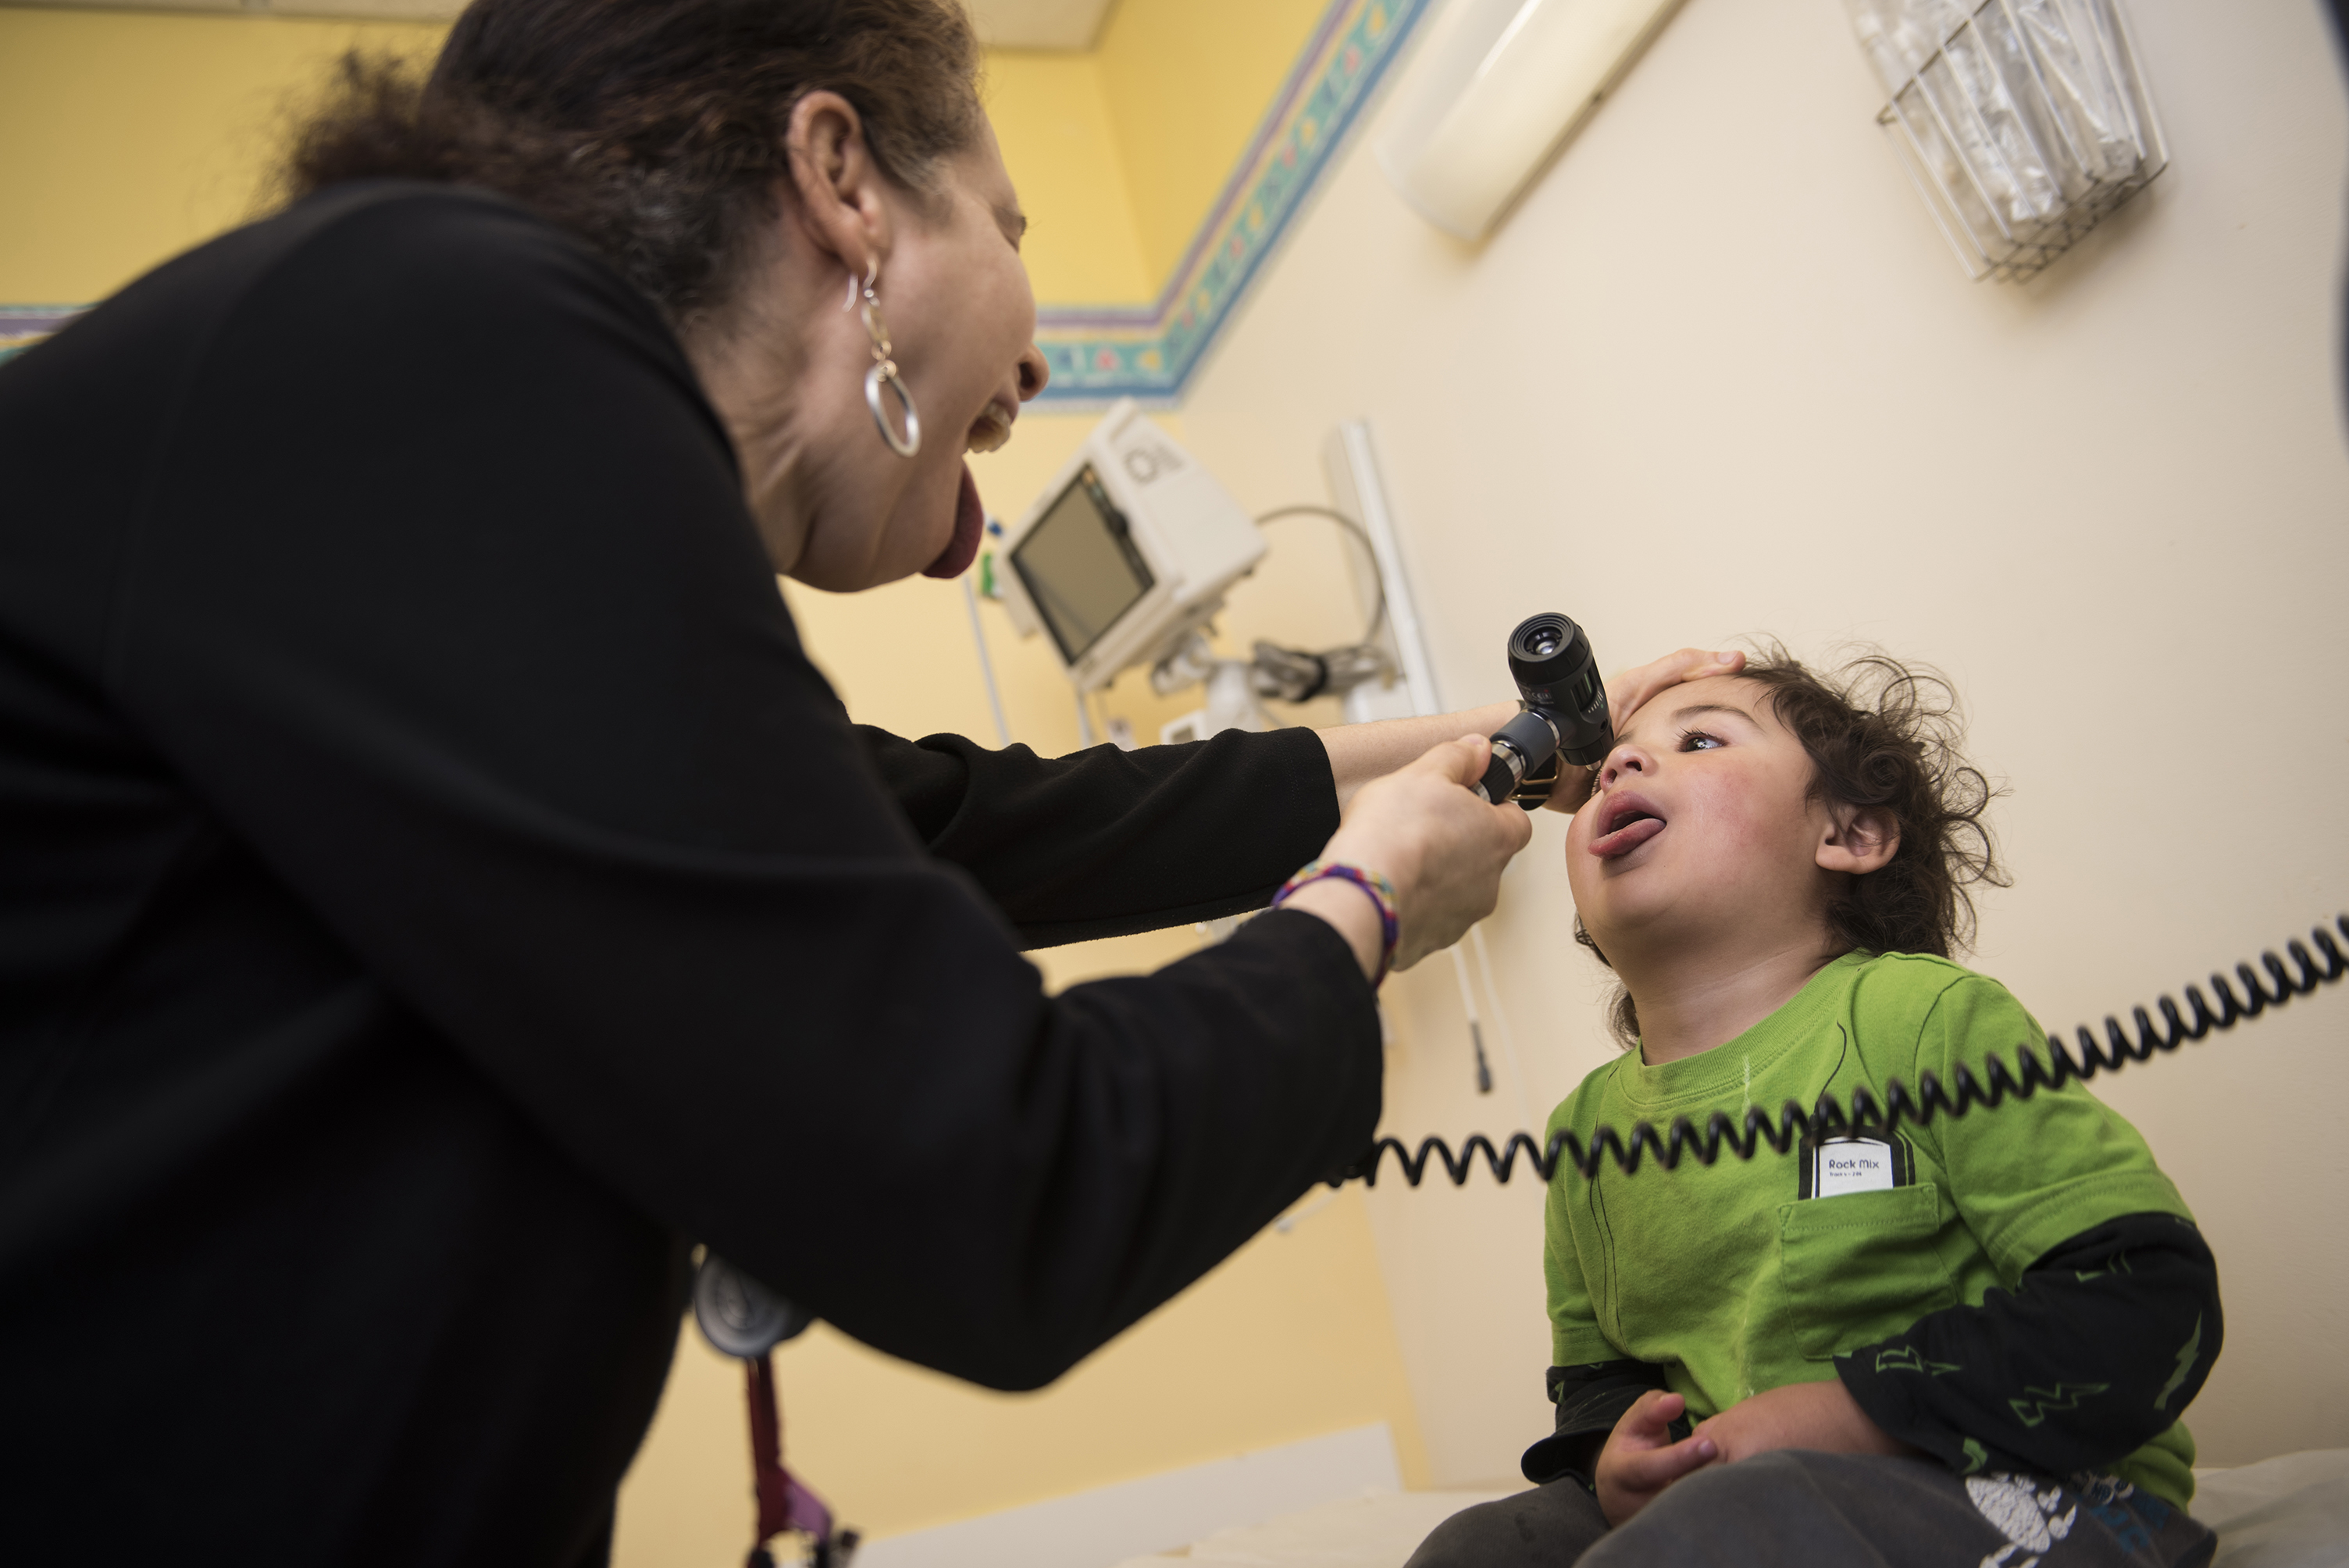 A Children's National Health System provider checks the throat of a patient with a laryngoscope.